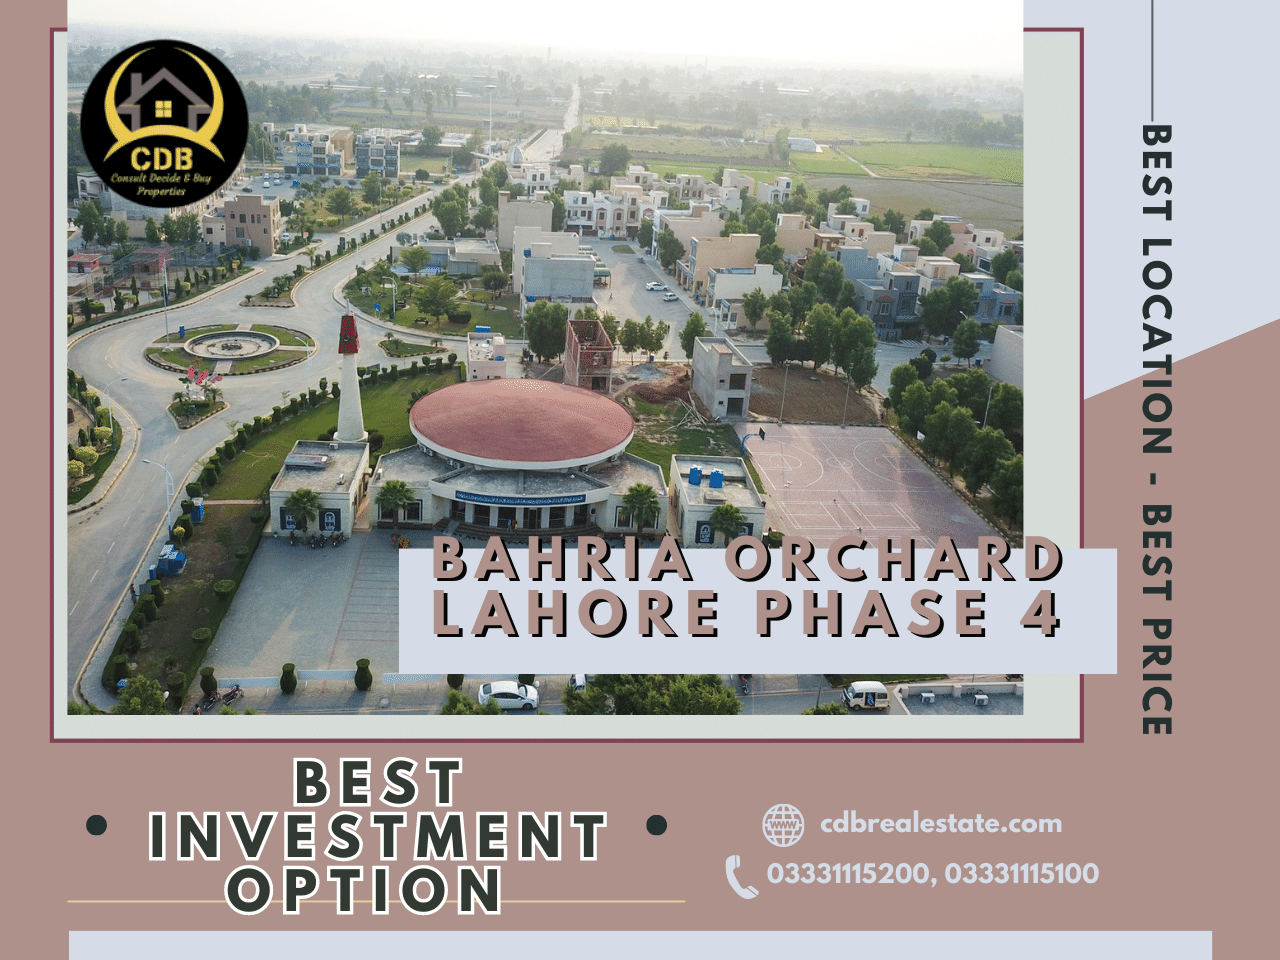 Bahria Orchard Lahore Phase 4 Best Investment Option